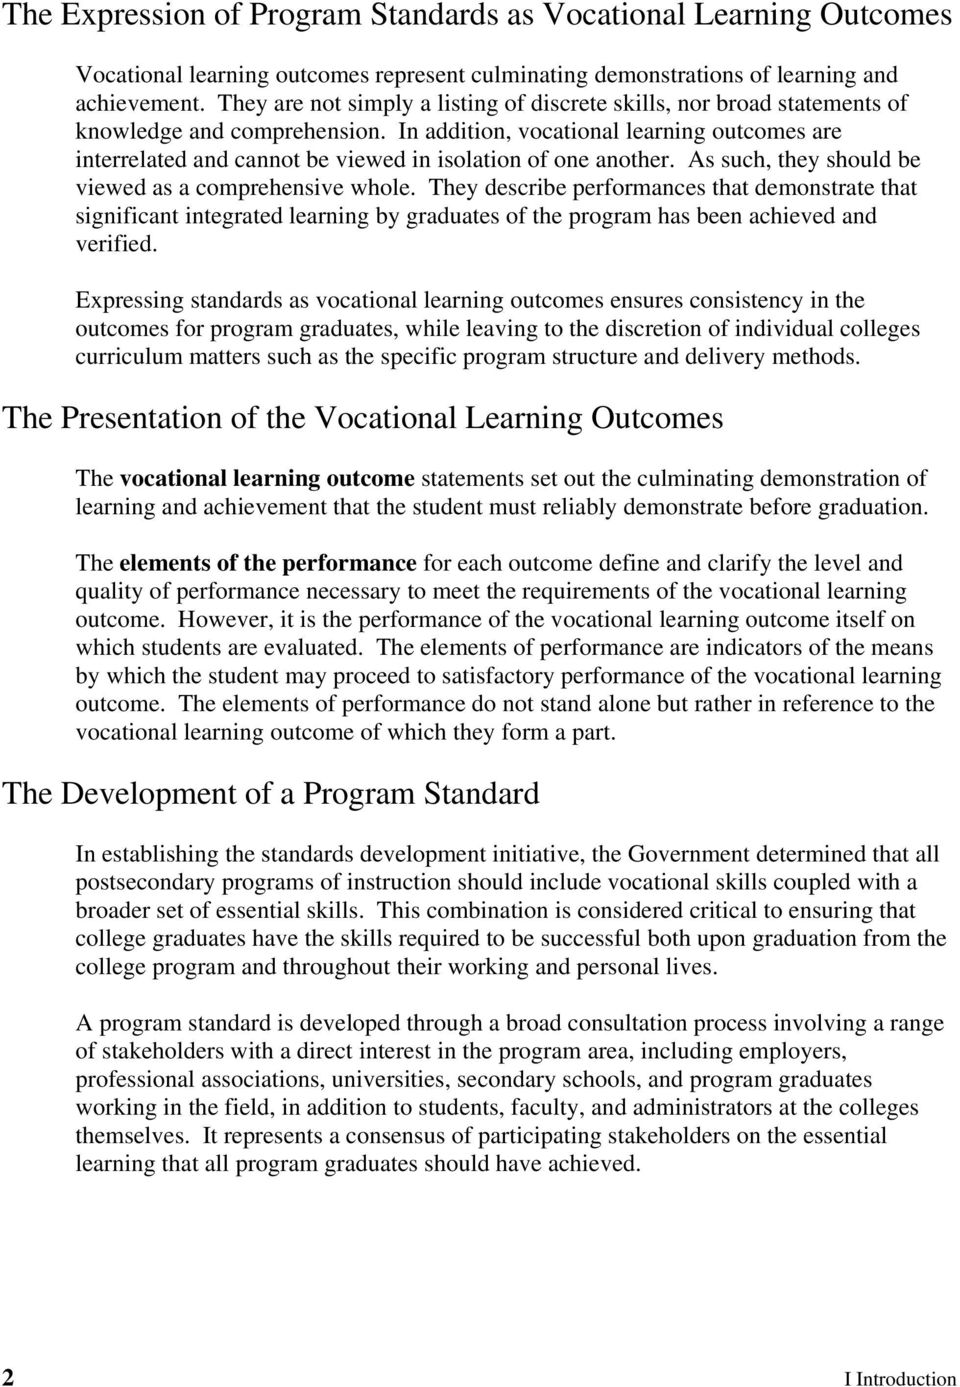 In addition, vocational learning outcomes are interrelated and cannot be viewed in isolation of one another. As such, they should be viewed as a comprehensive whole.